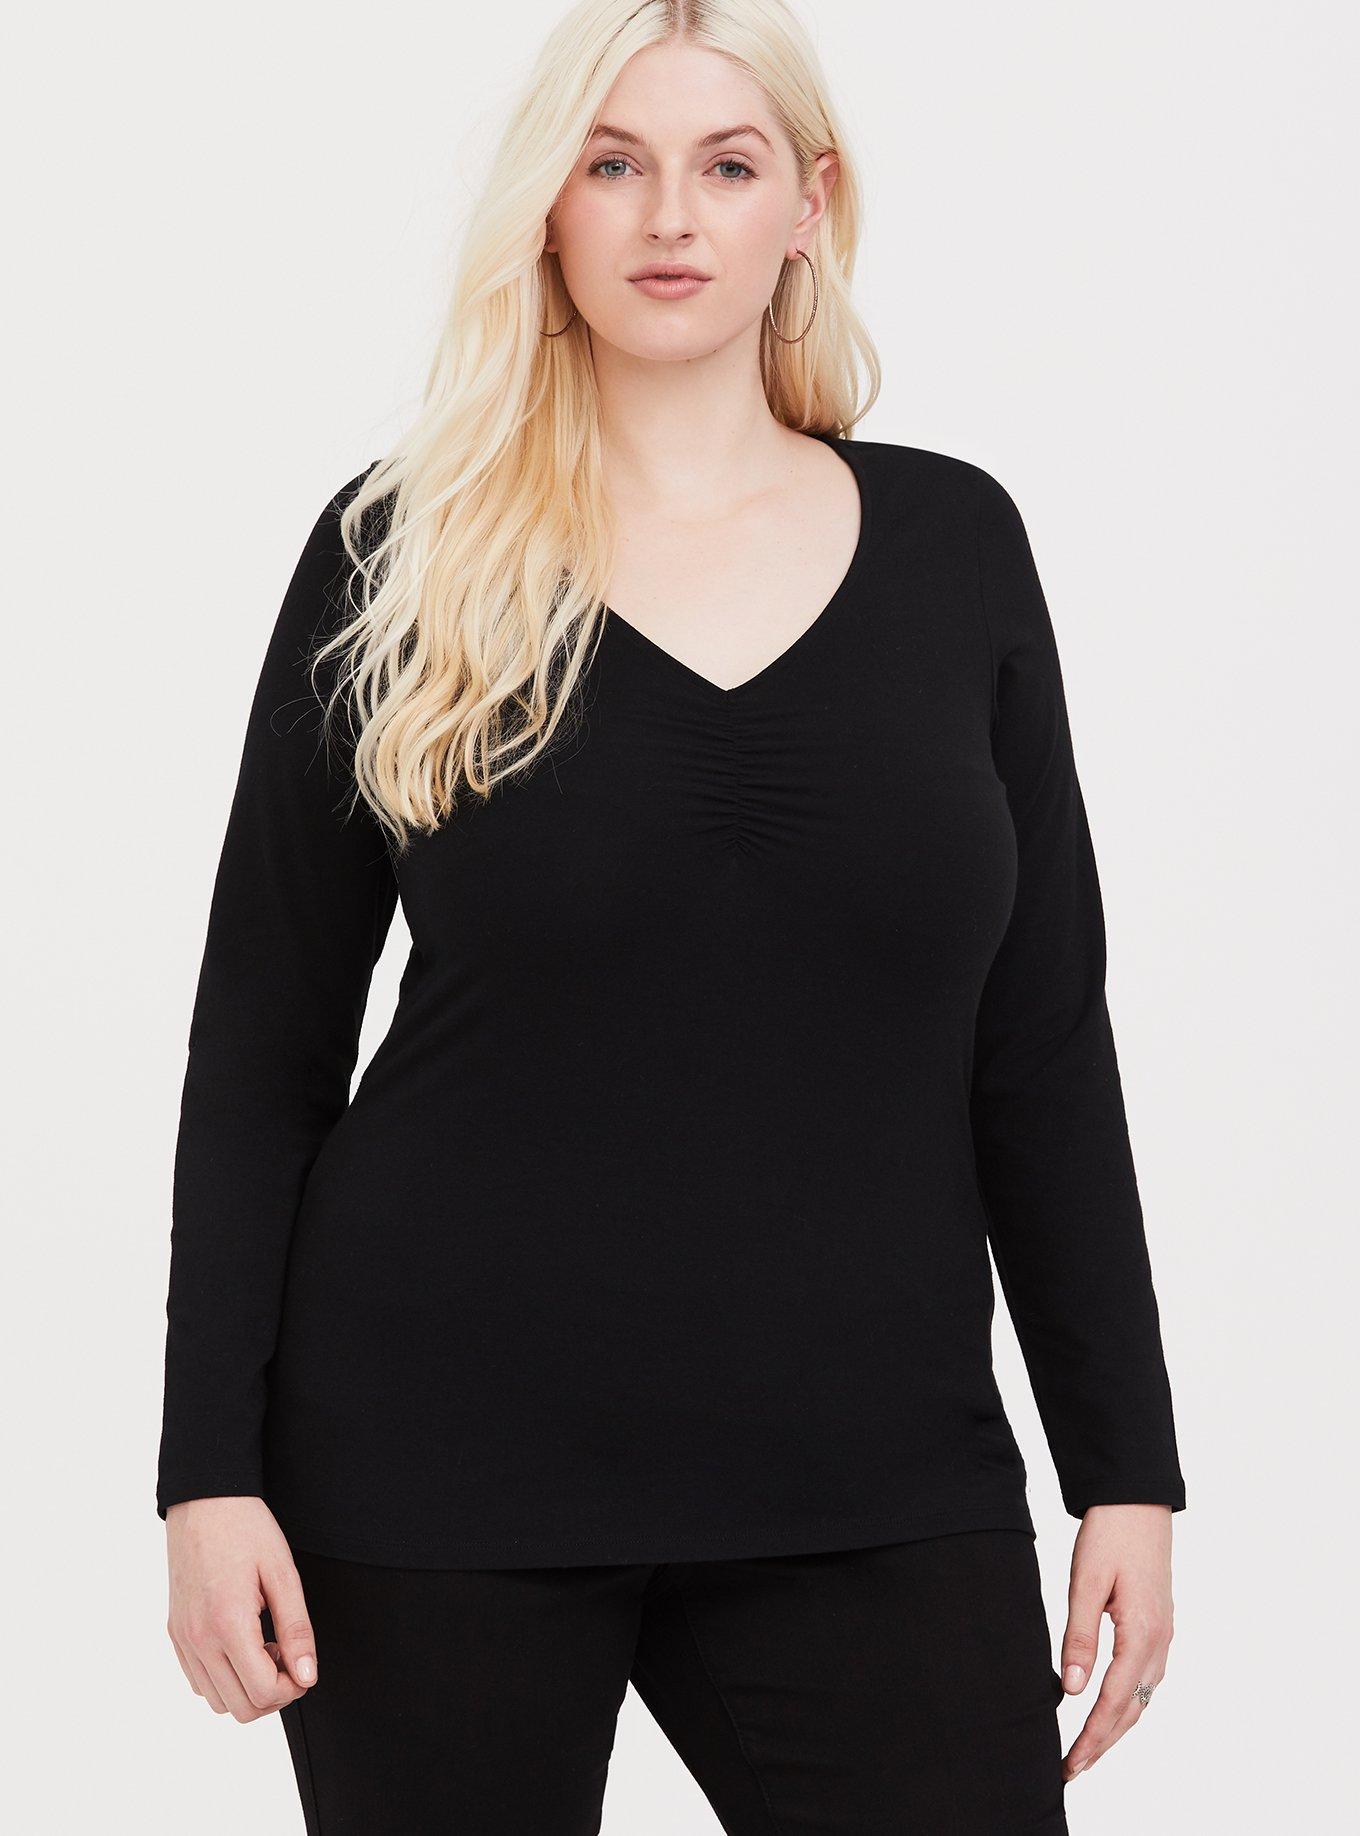 Plus Size - Black Front Ruched Foxy - Torrid